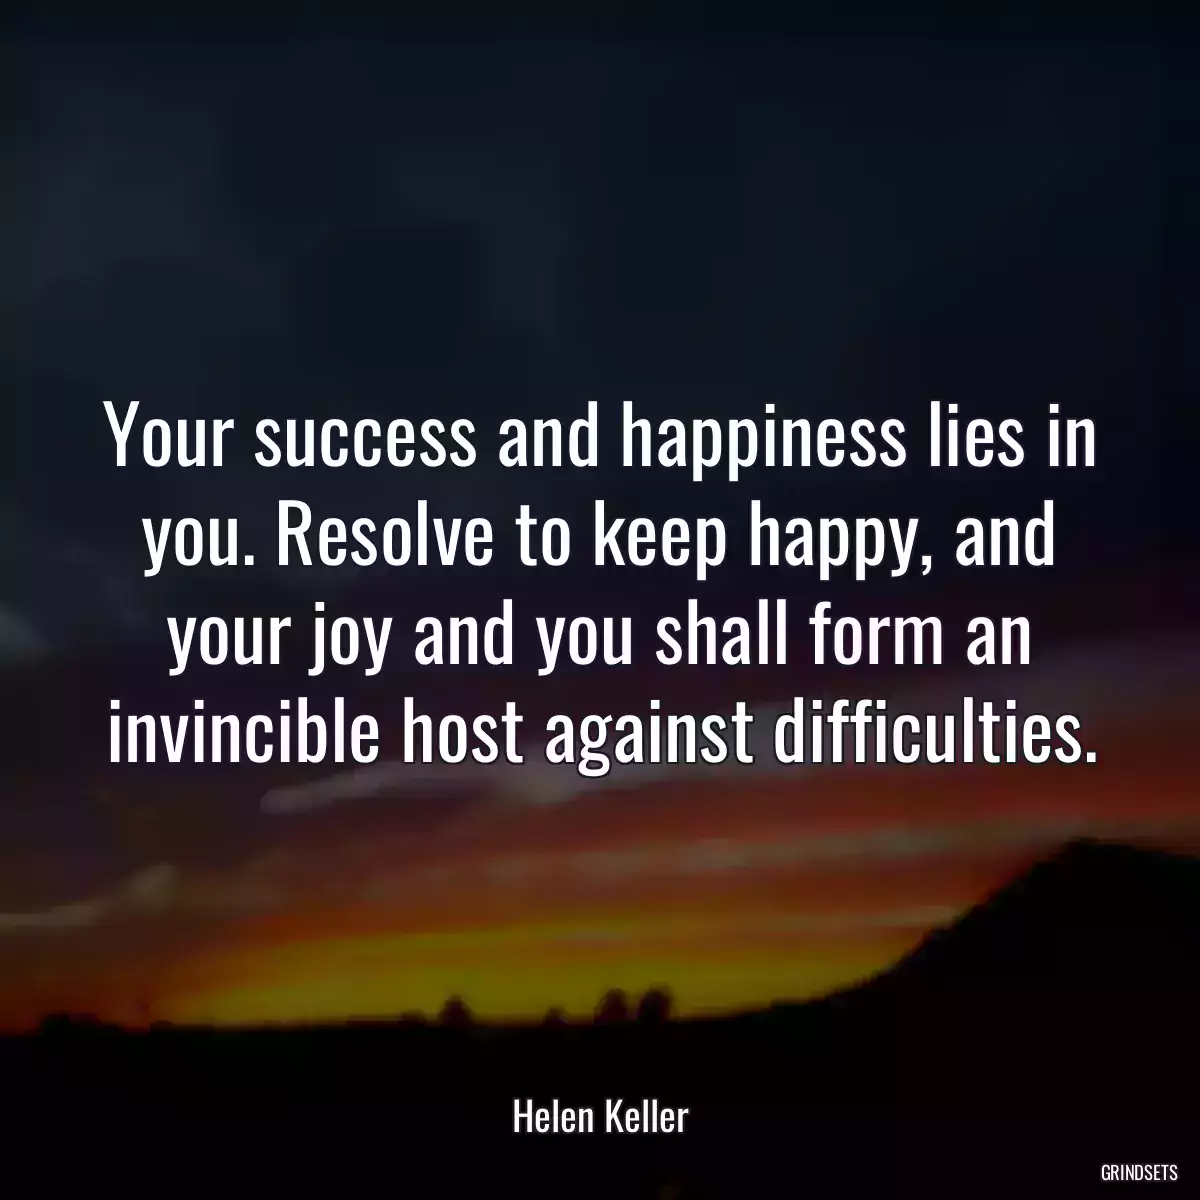 Your success and happiness lies in you. Resolve to keep happy, and your joy and you shall form an invincible host against difficulties.